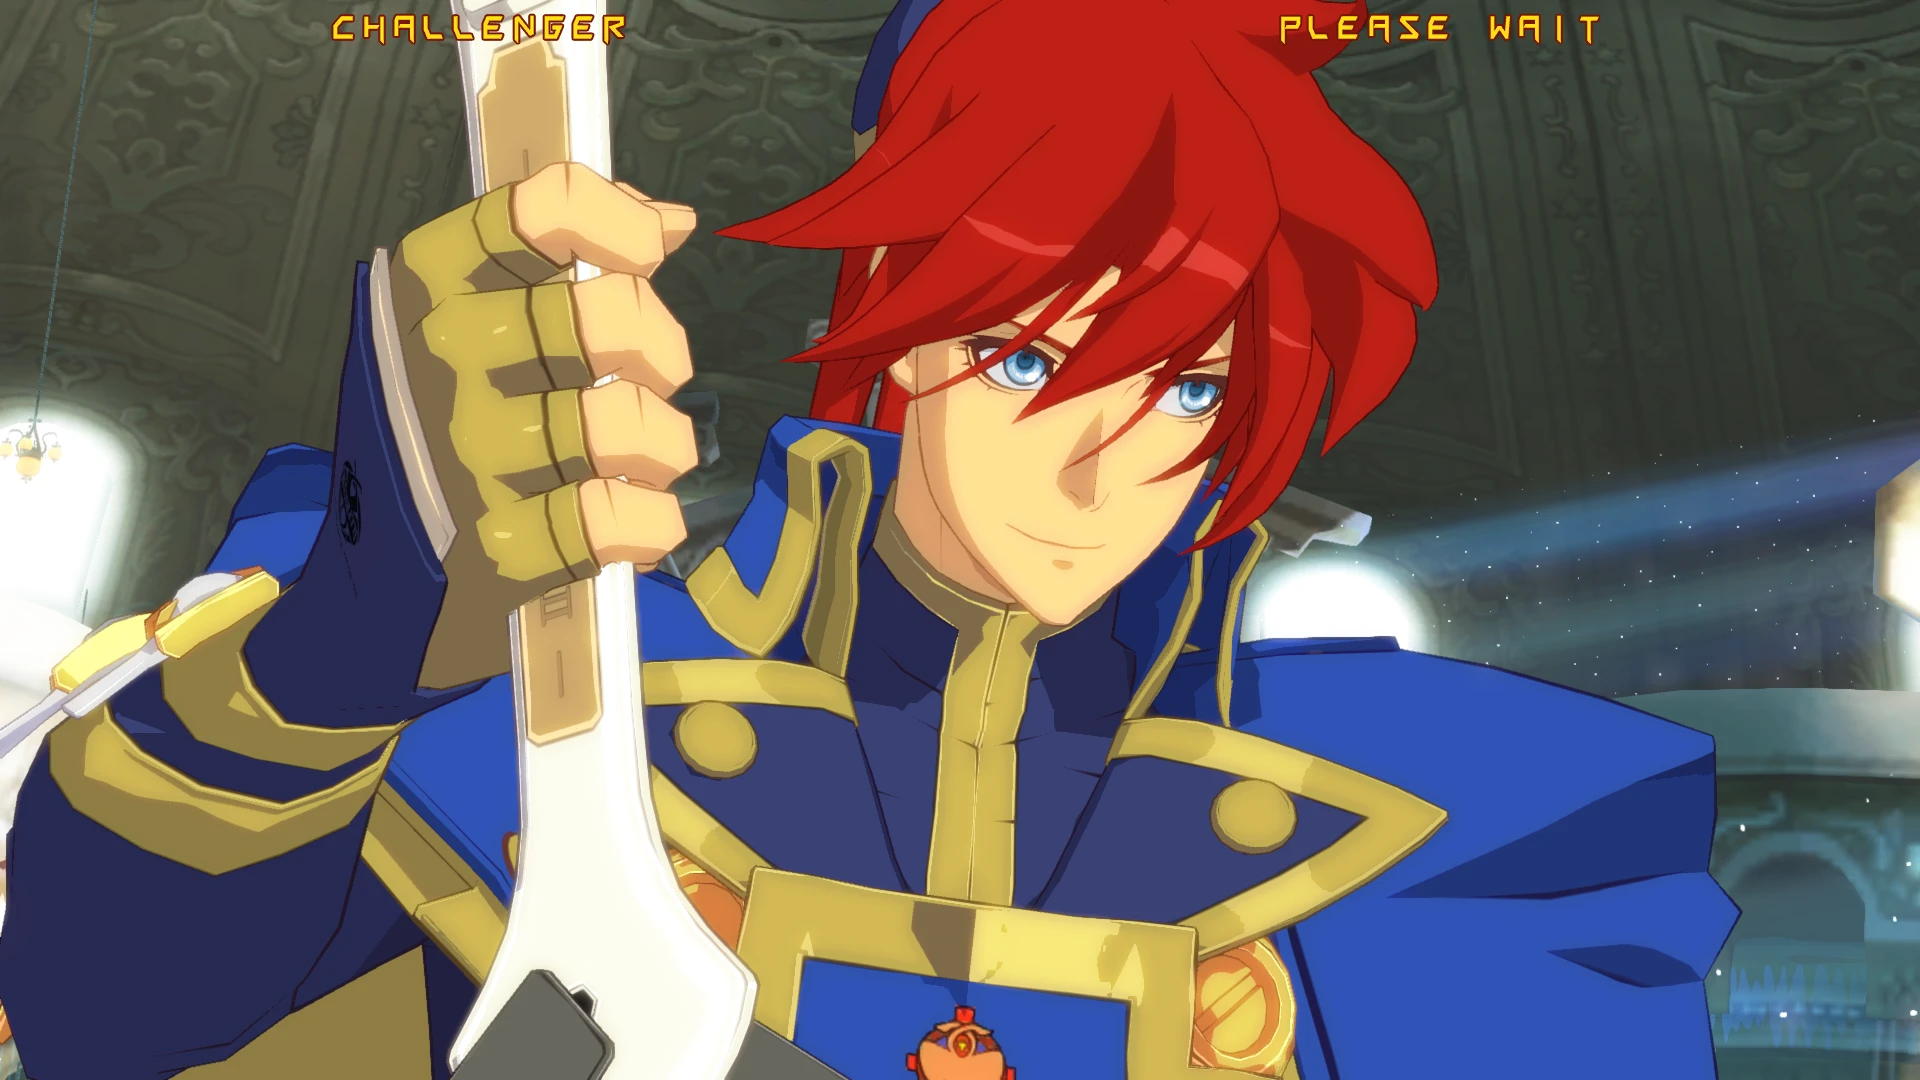 Roy Ky Kiske at Guilty Gear Xrd Nexus - Mods and Community